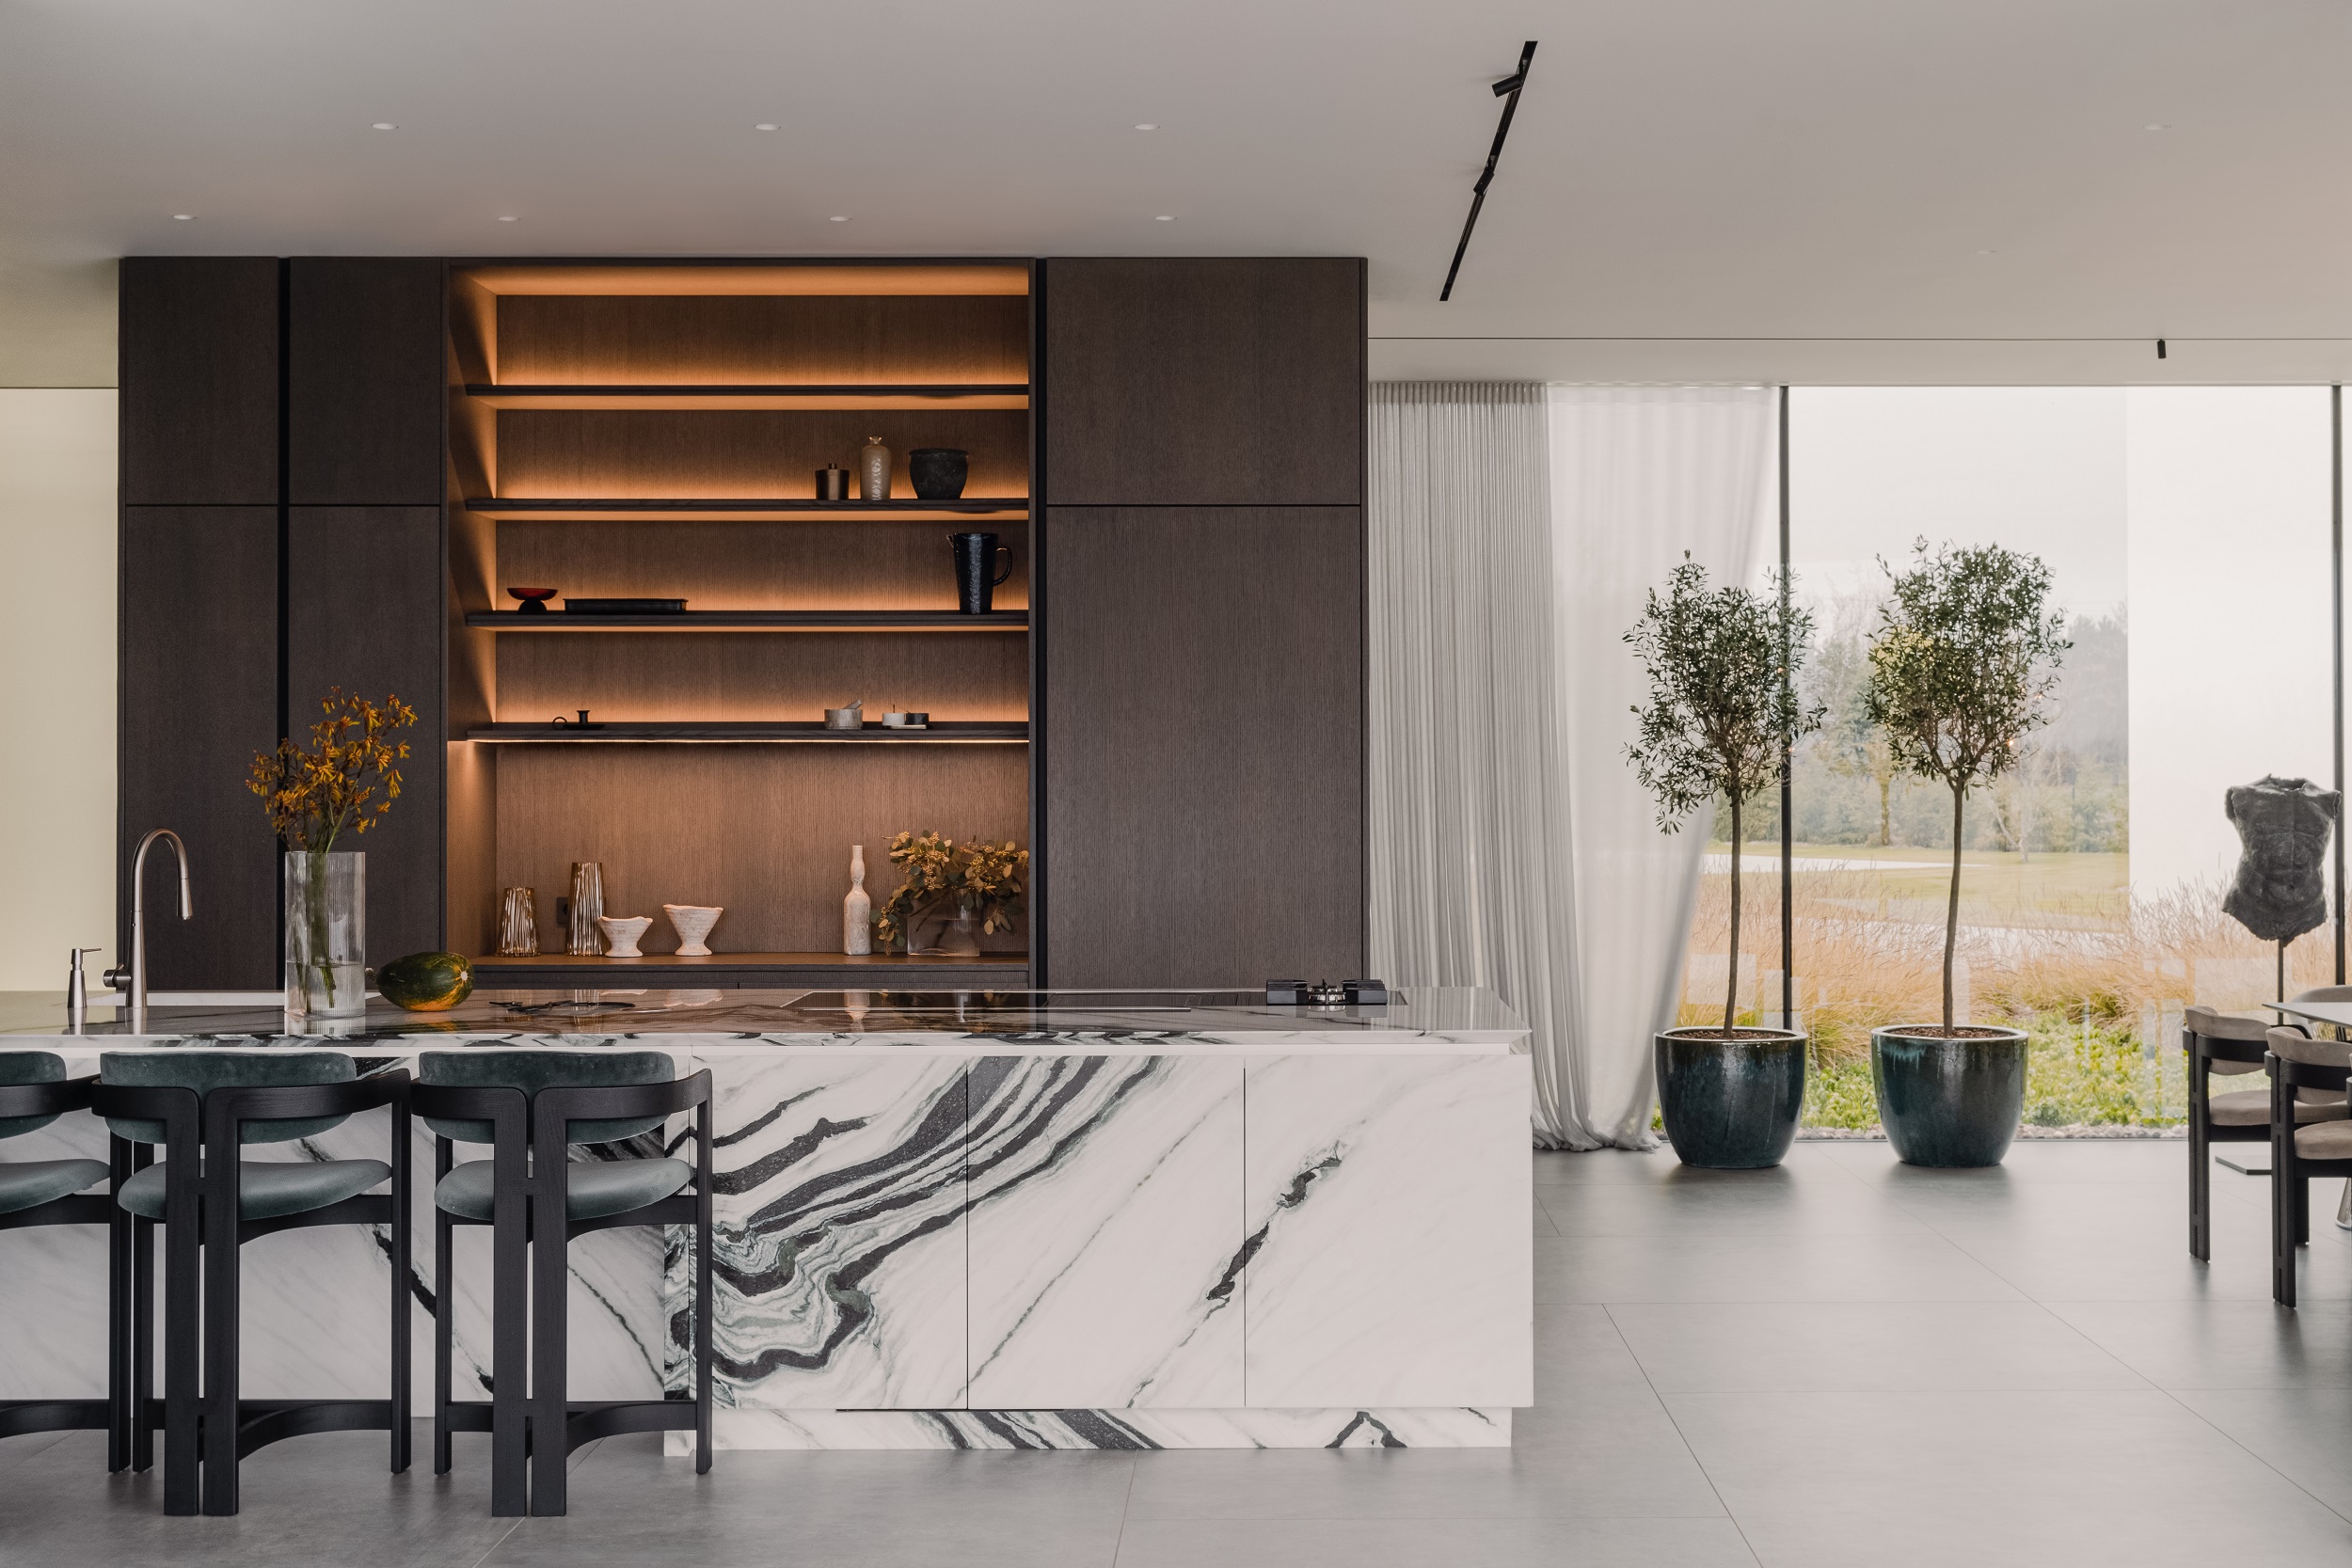 The contemporary dining room of the Project House in Poland decorated by LG appliances and the Polish interior desginer, Paweł Jurkiewicz
